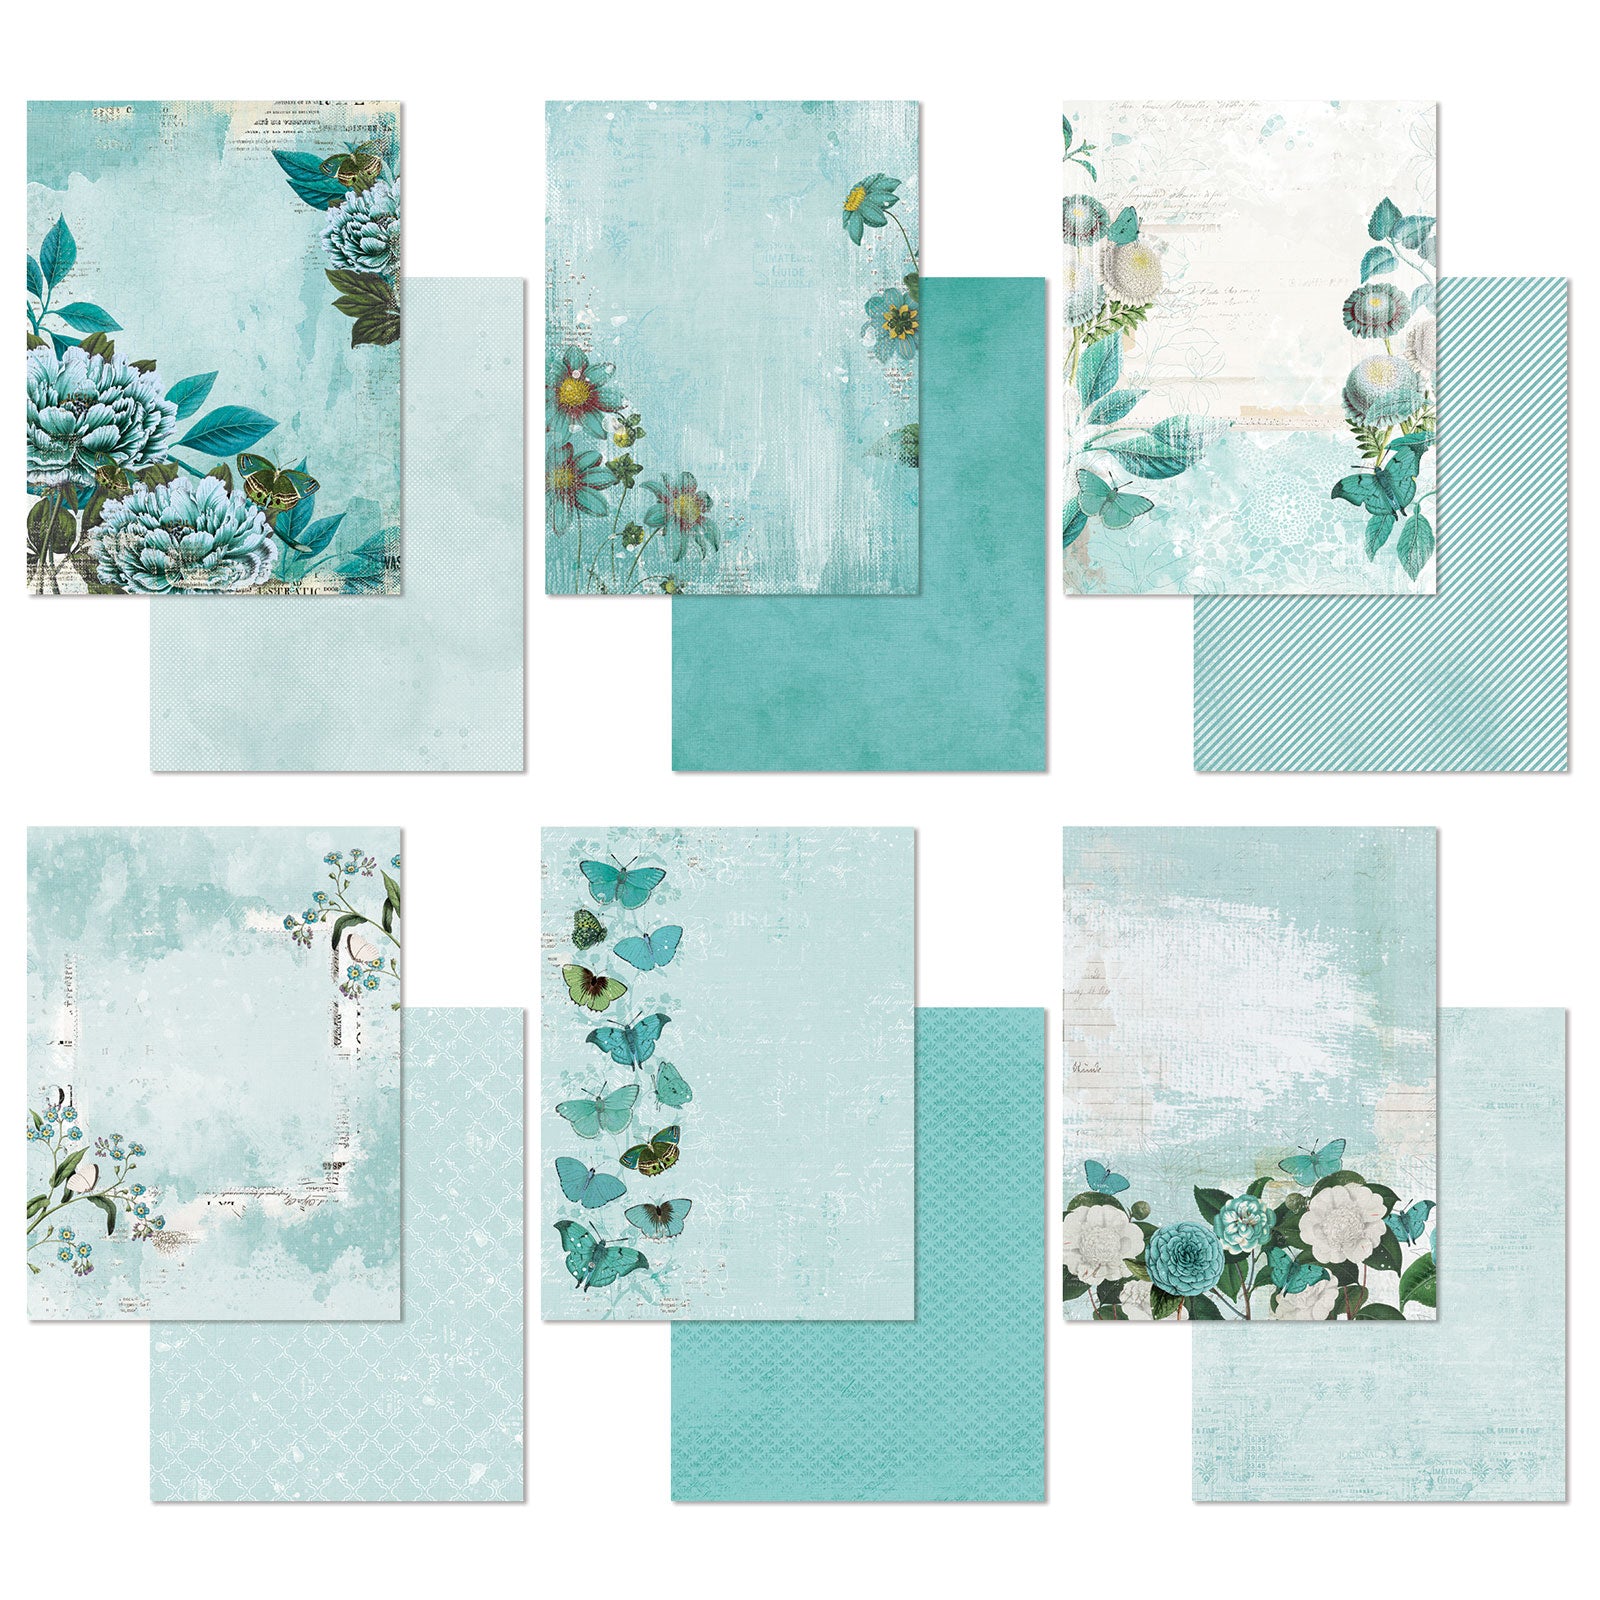 49 & Market Color Swatch Teal 6 x 8 Collection Pack